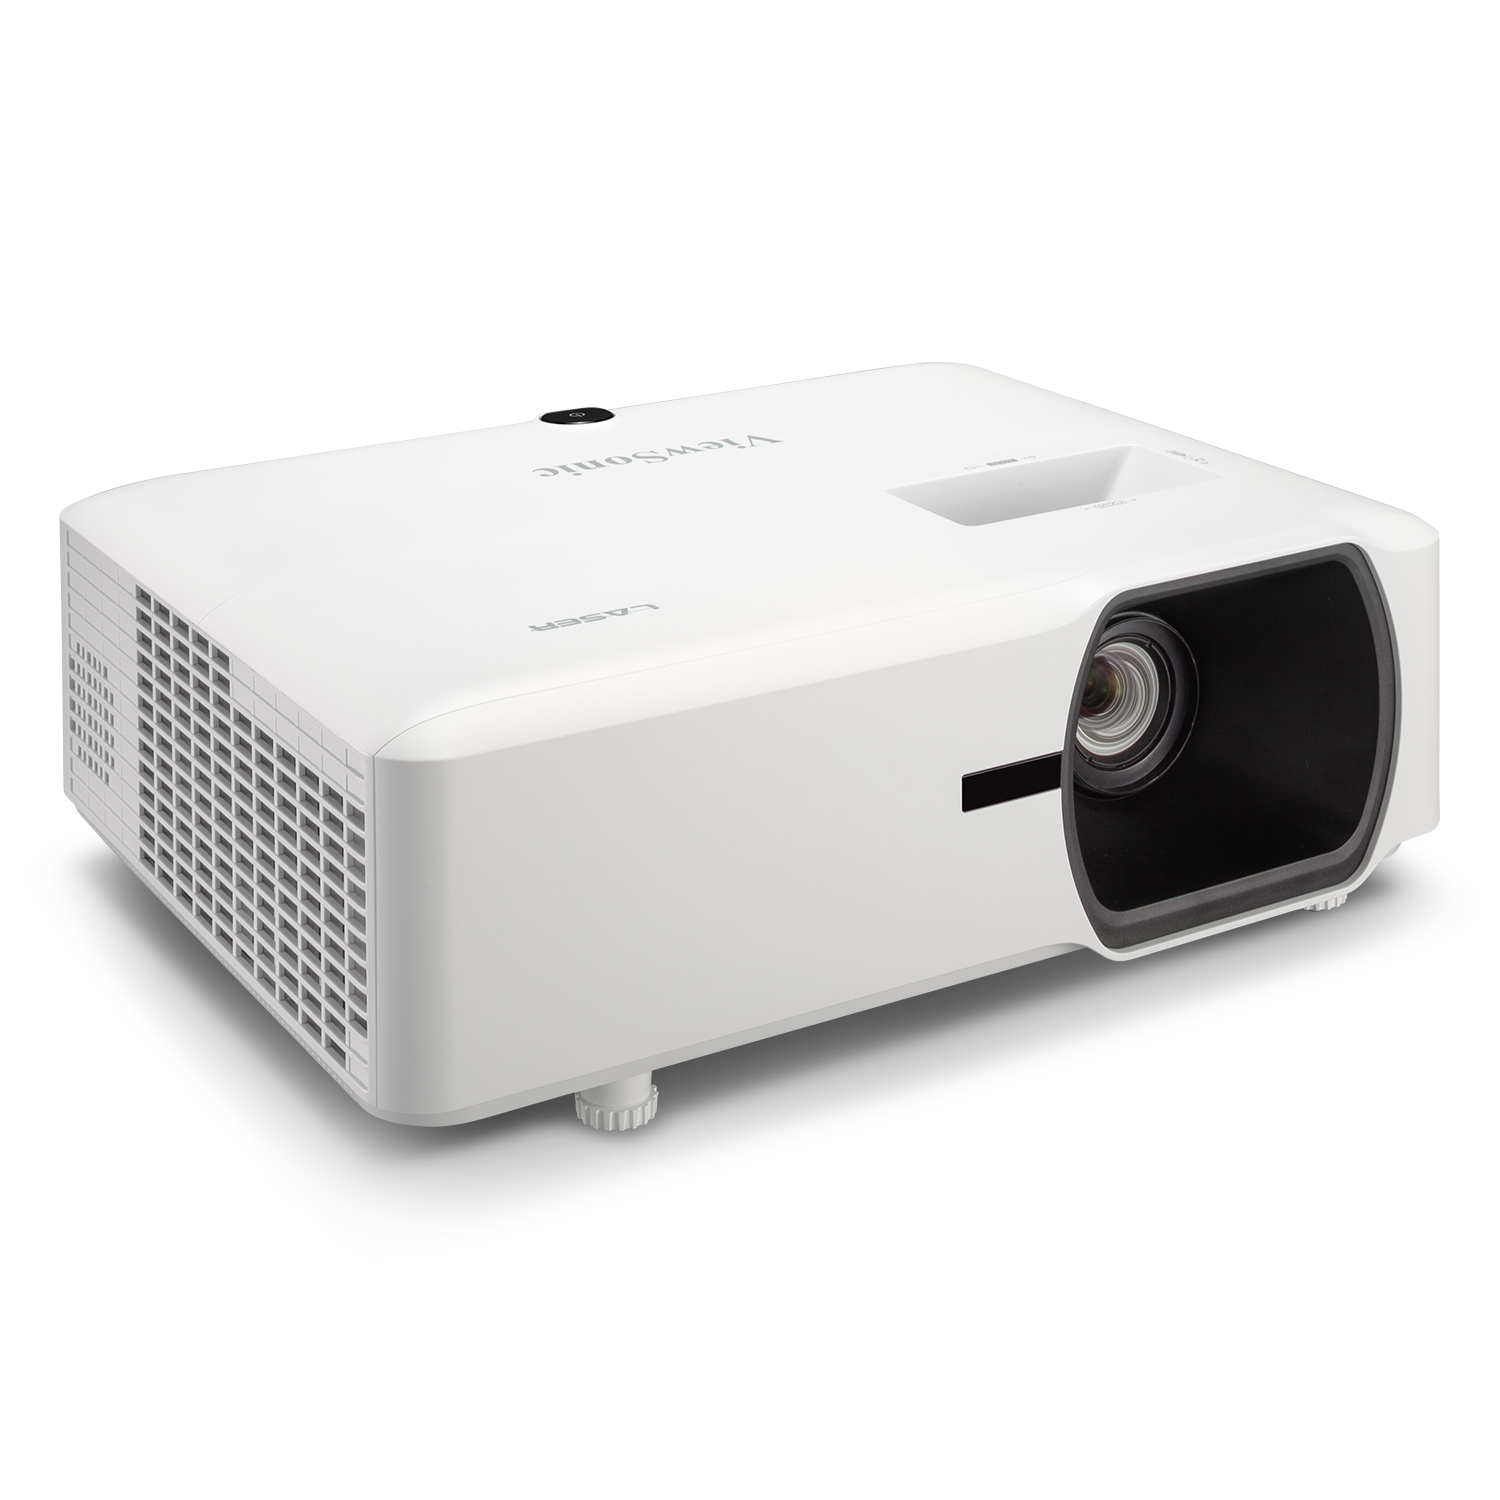 ViewSonic LS750WU 5000 Lumens WUXGA Networkable Laser Projector with 1.3x Optical Zoom Vertical Horizontal Keystone and Lens Shift for Large Venues - image 3 of 6